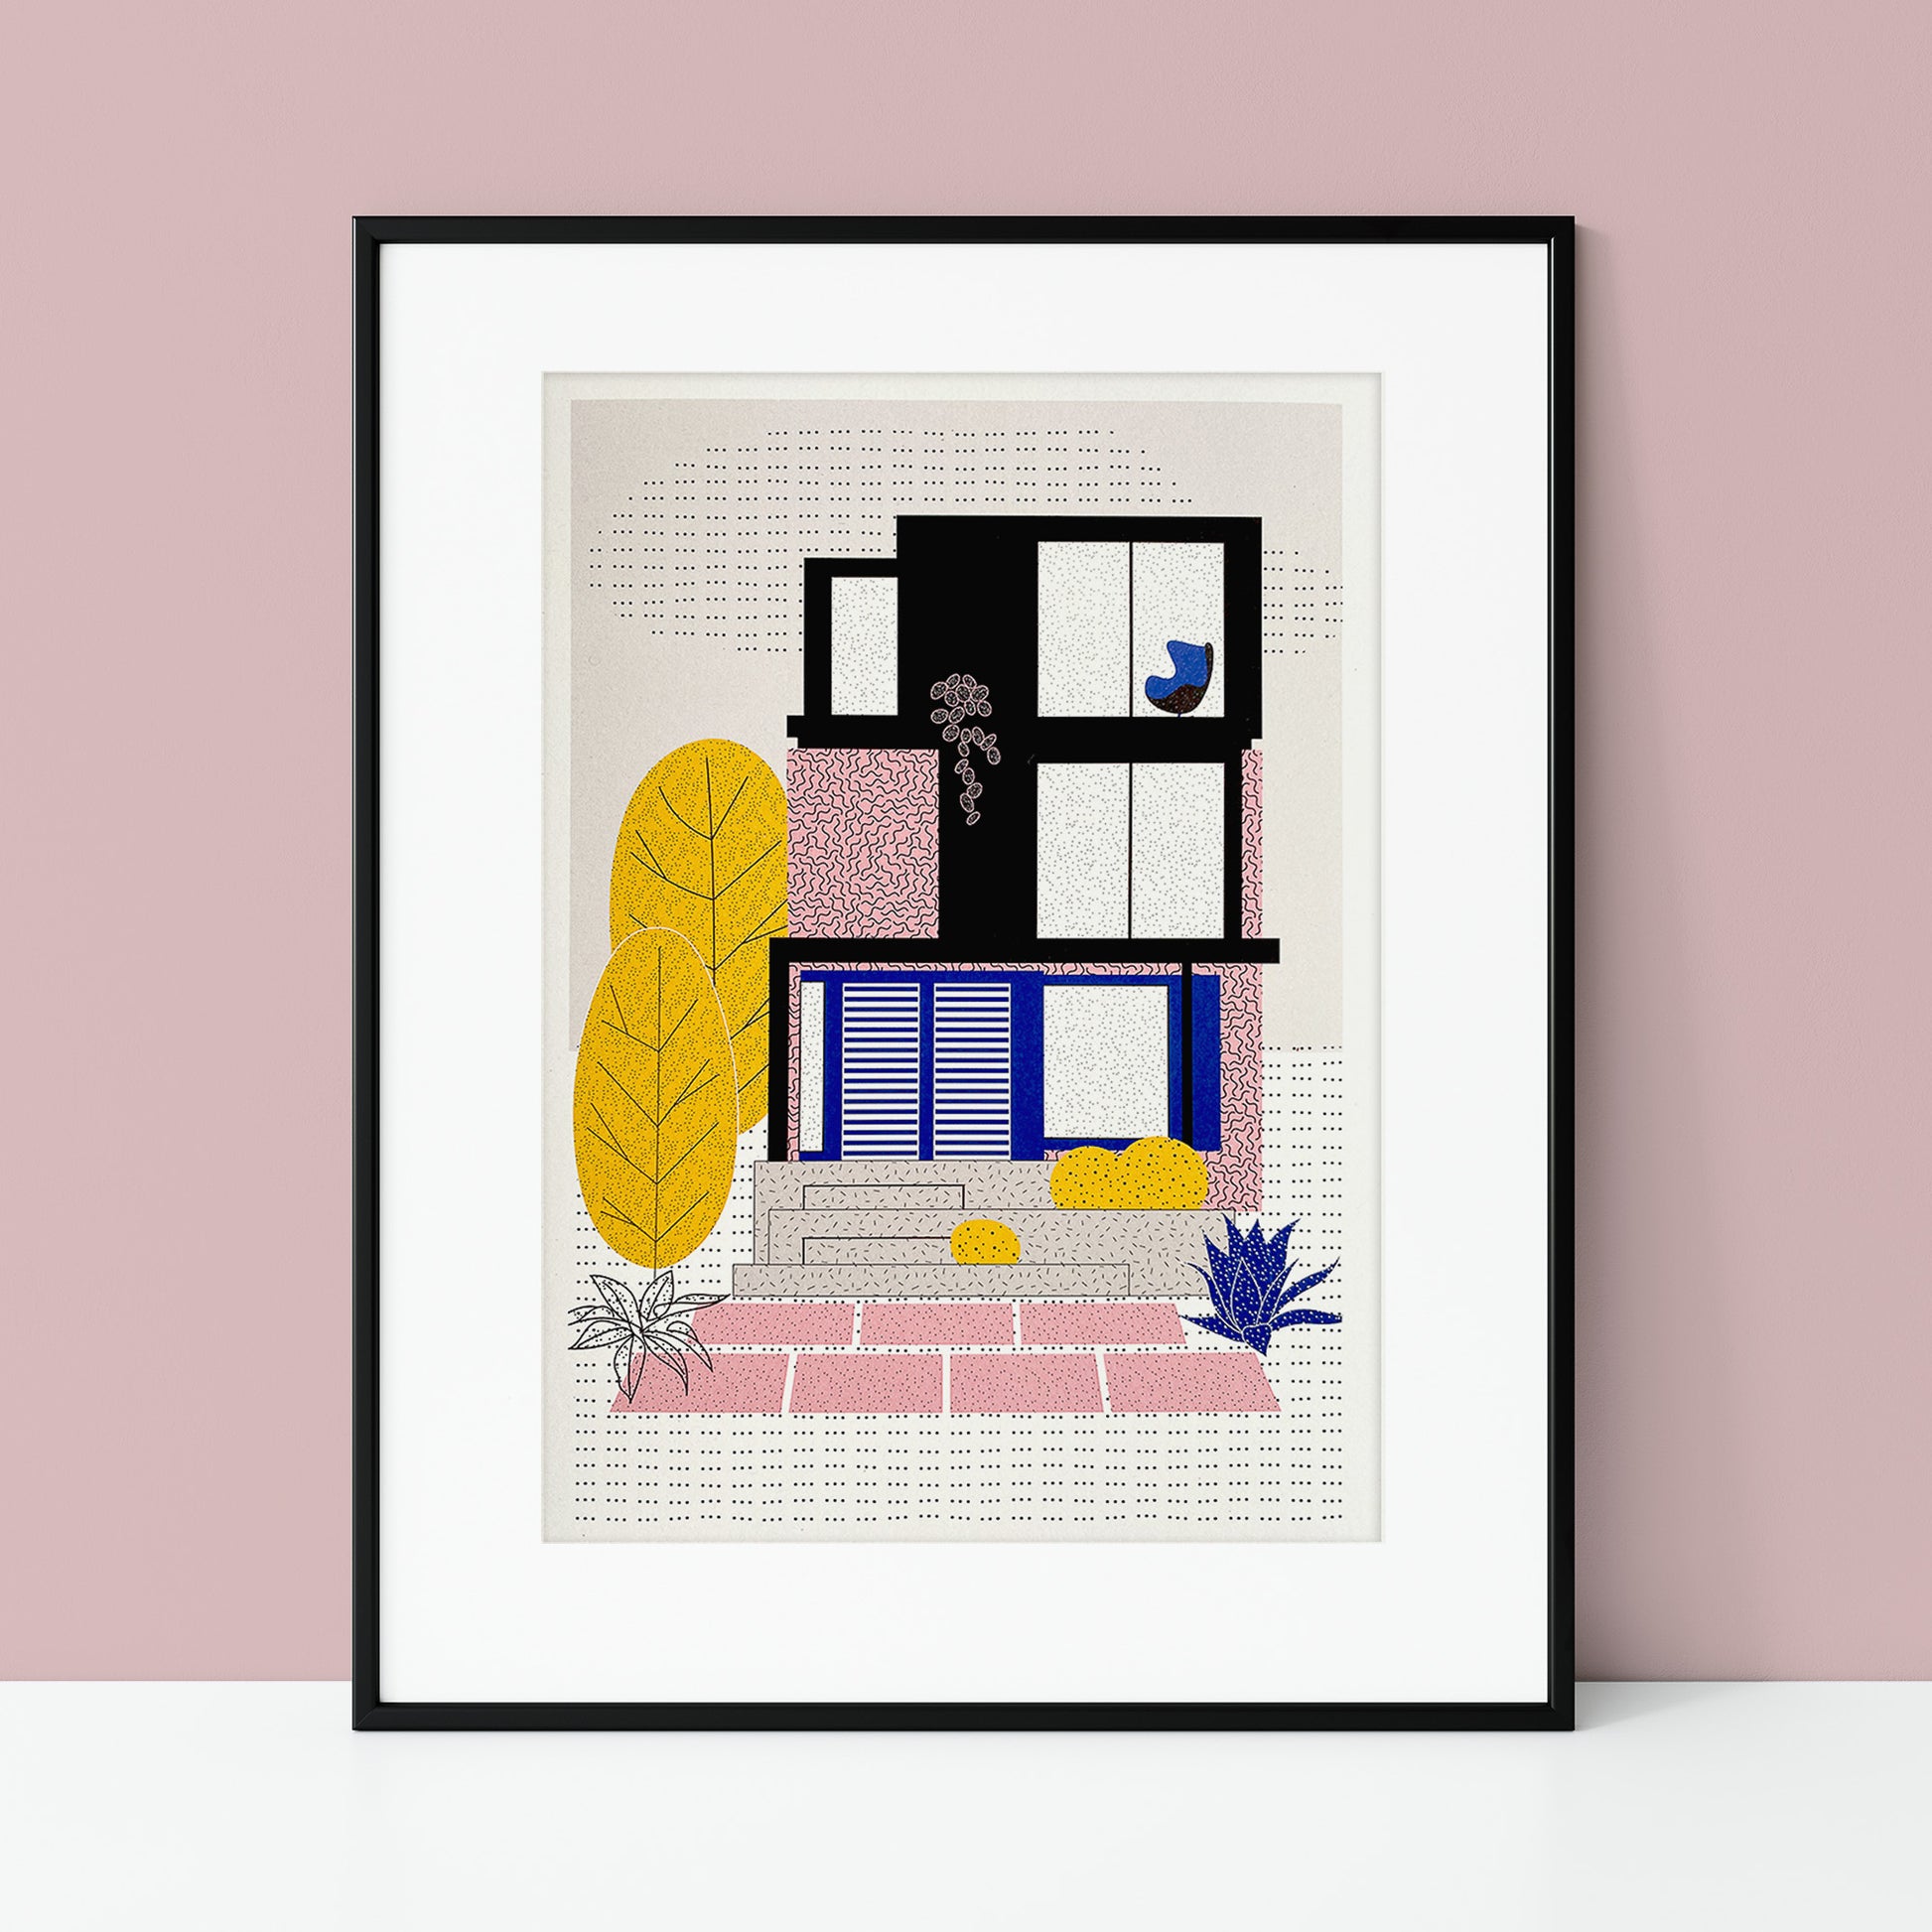 Pink Suburbs Art Print by The Print Lass. Shown in black frame with mount (not included)